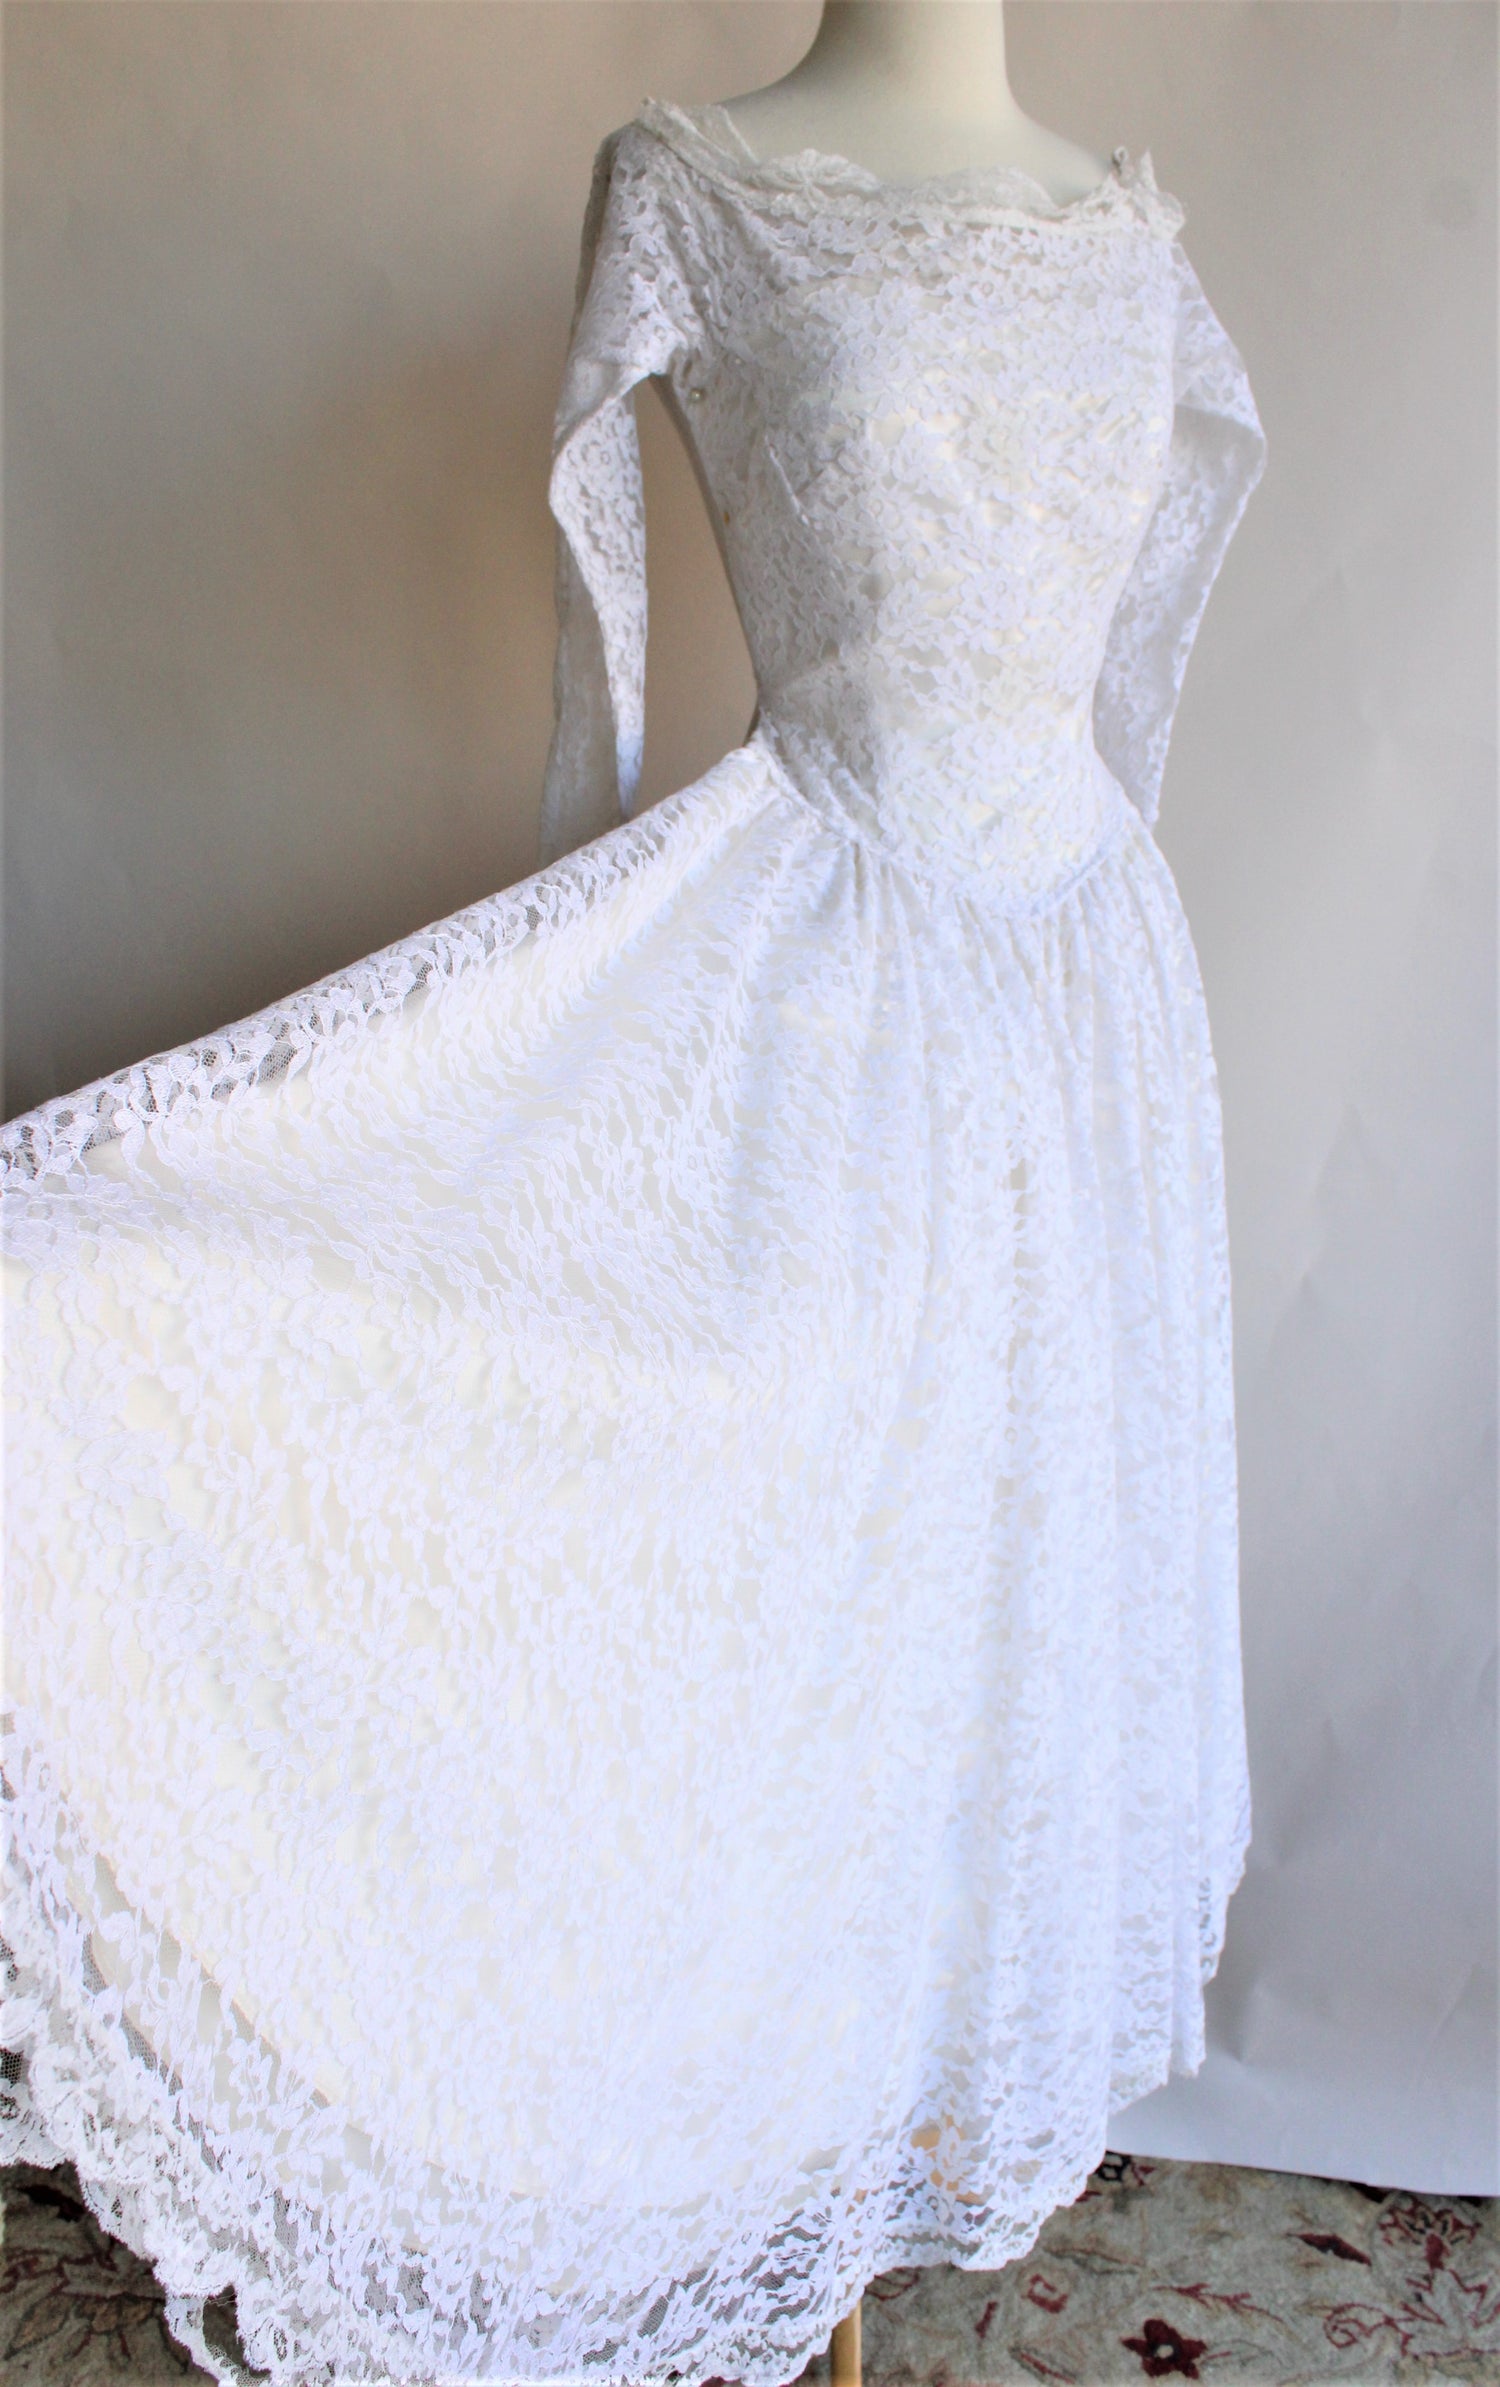 1950s White Lace Fit and Flare New Look Dress With Full Circle Skirt